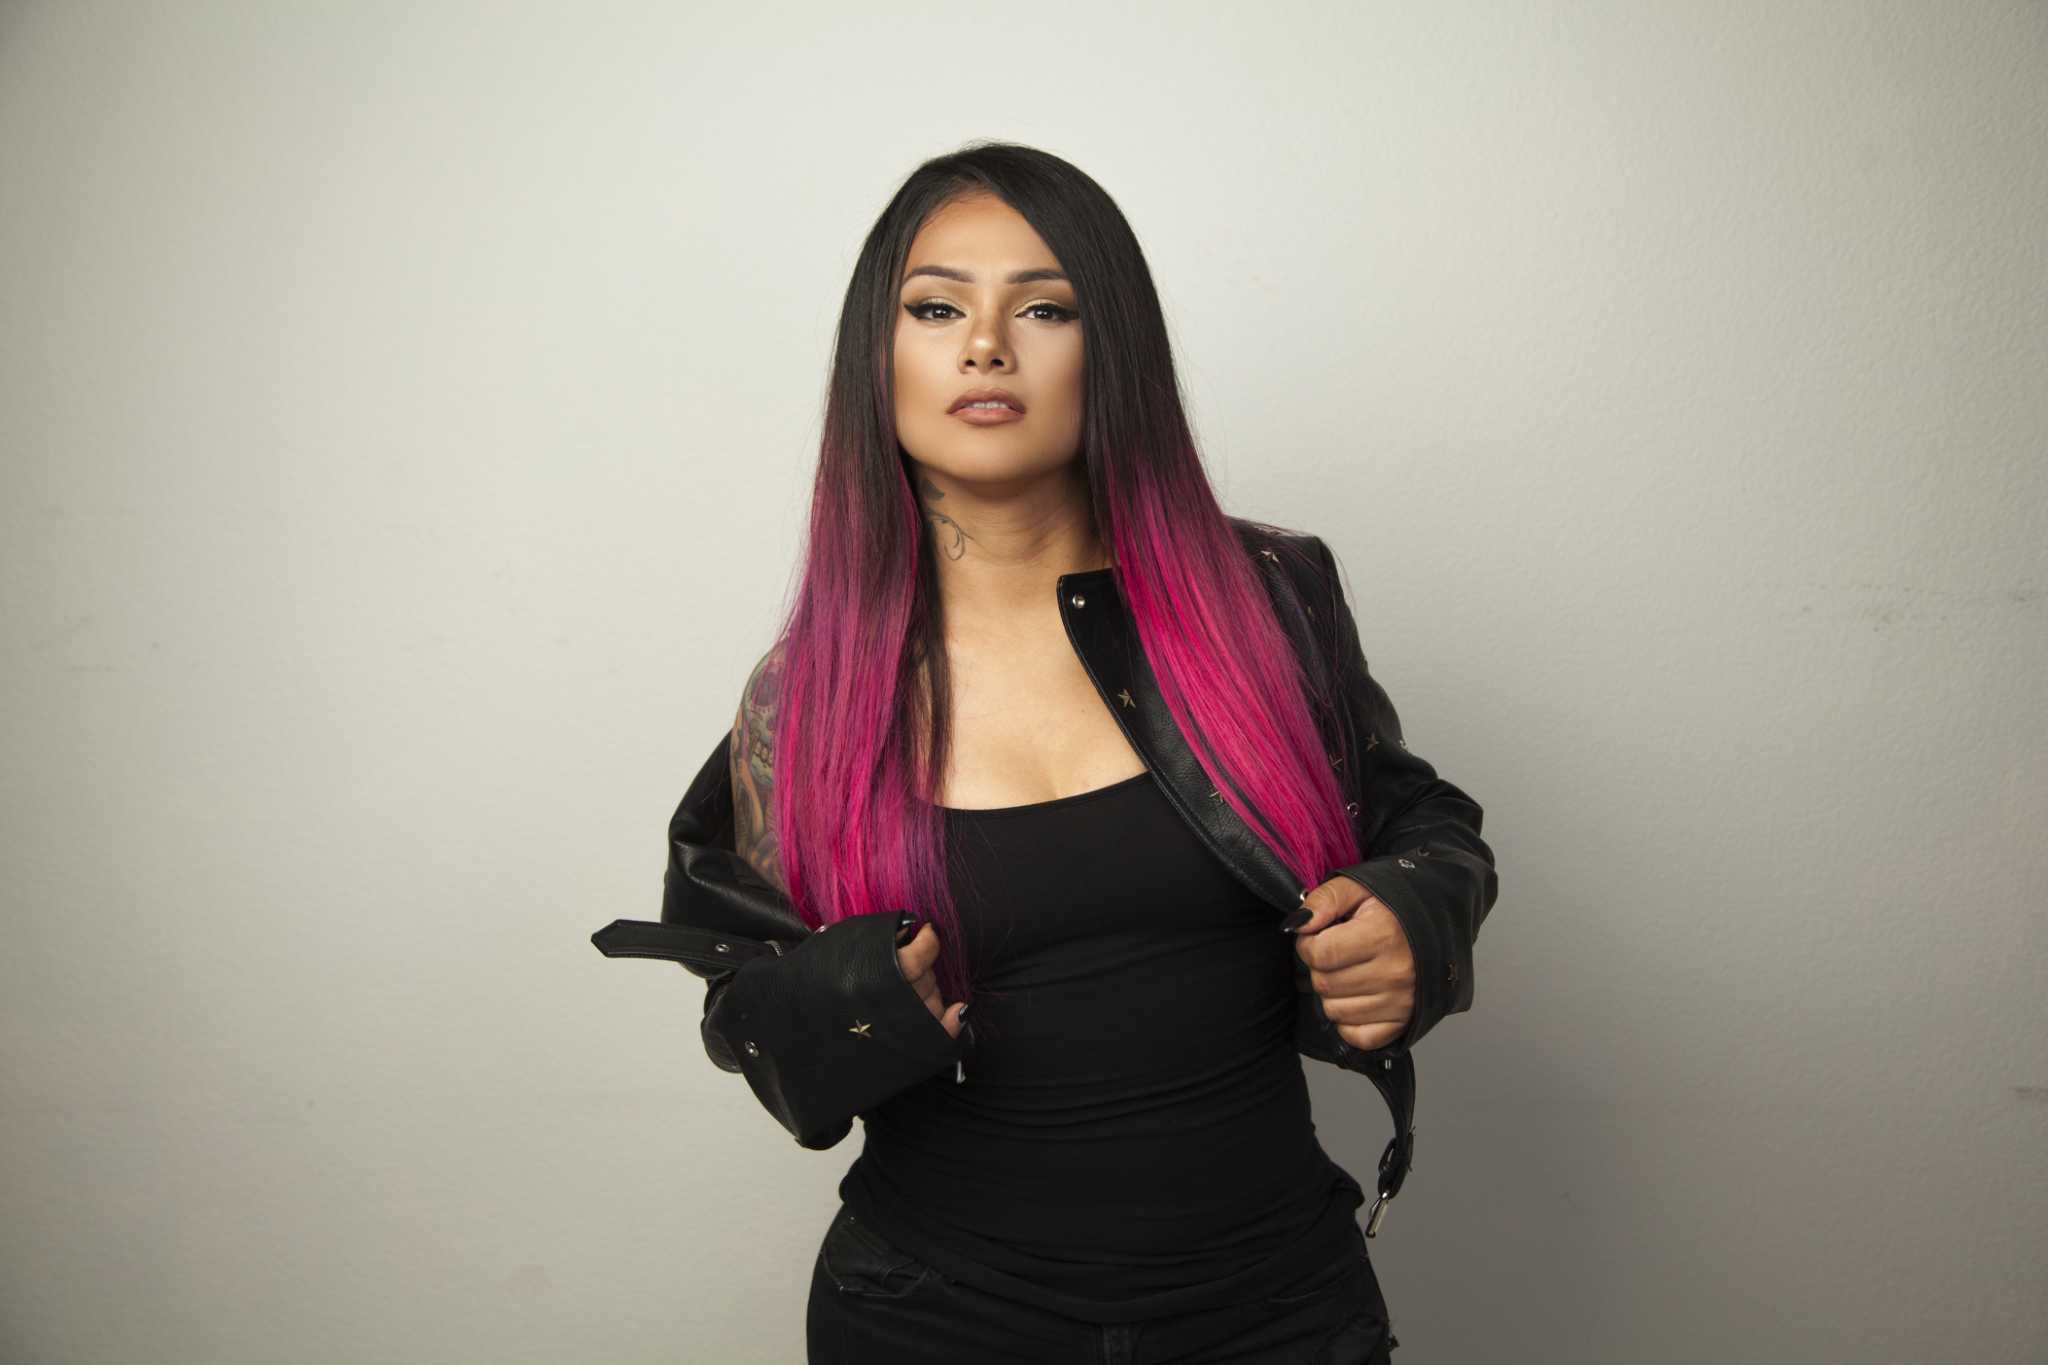 Snow tha Product, who came up in Texas, is on the verge of a breakout